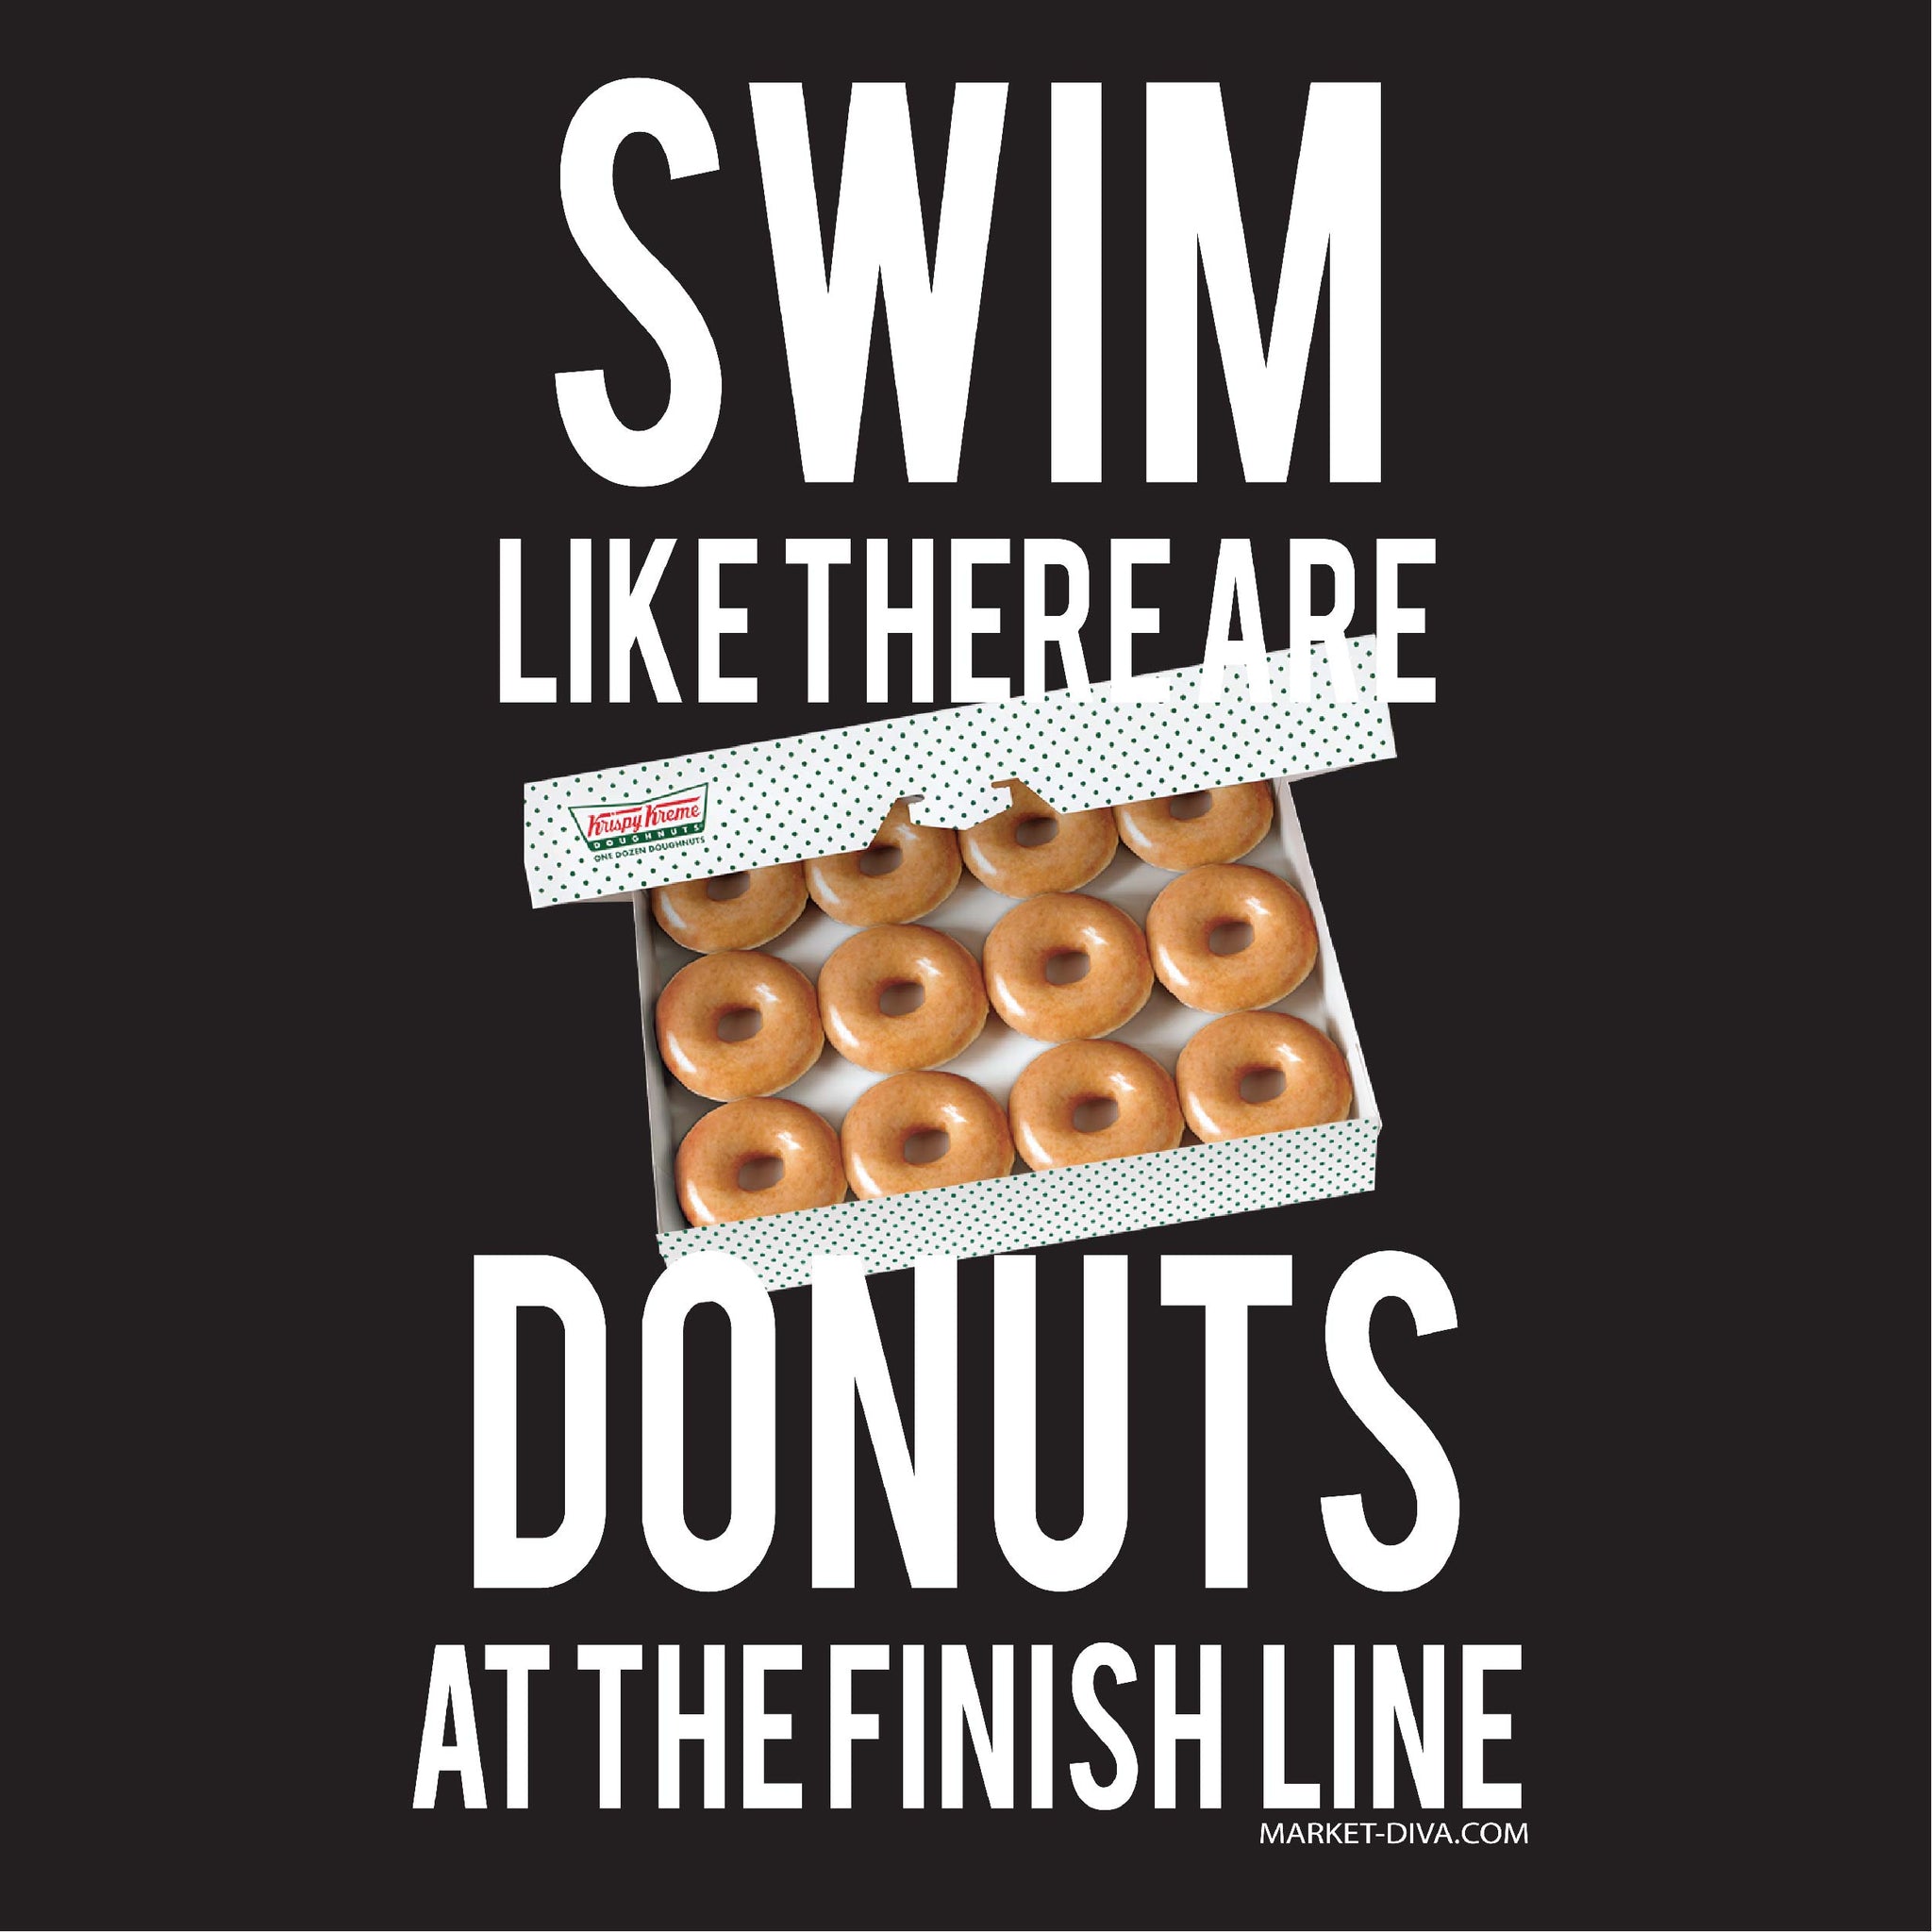 Swim Like Donuts are At Finish Line